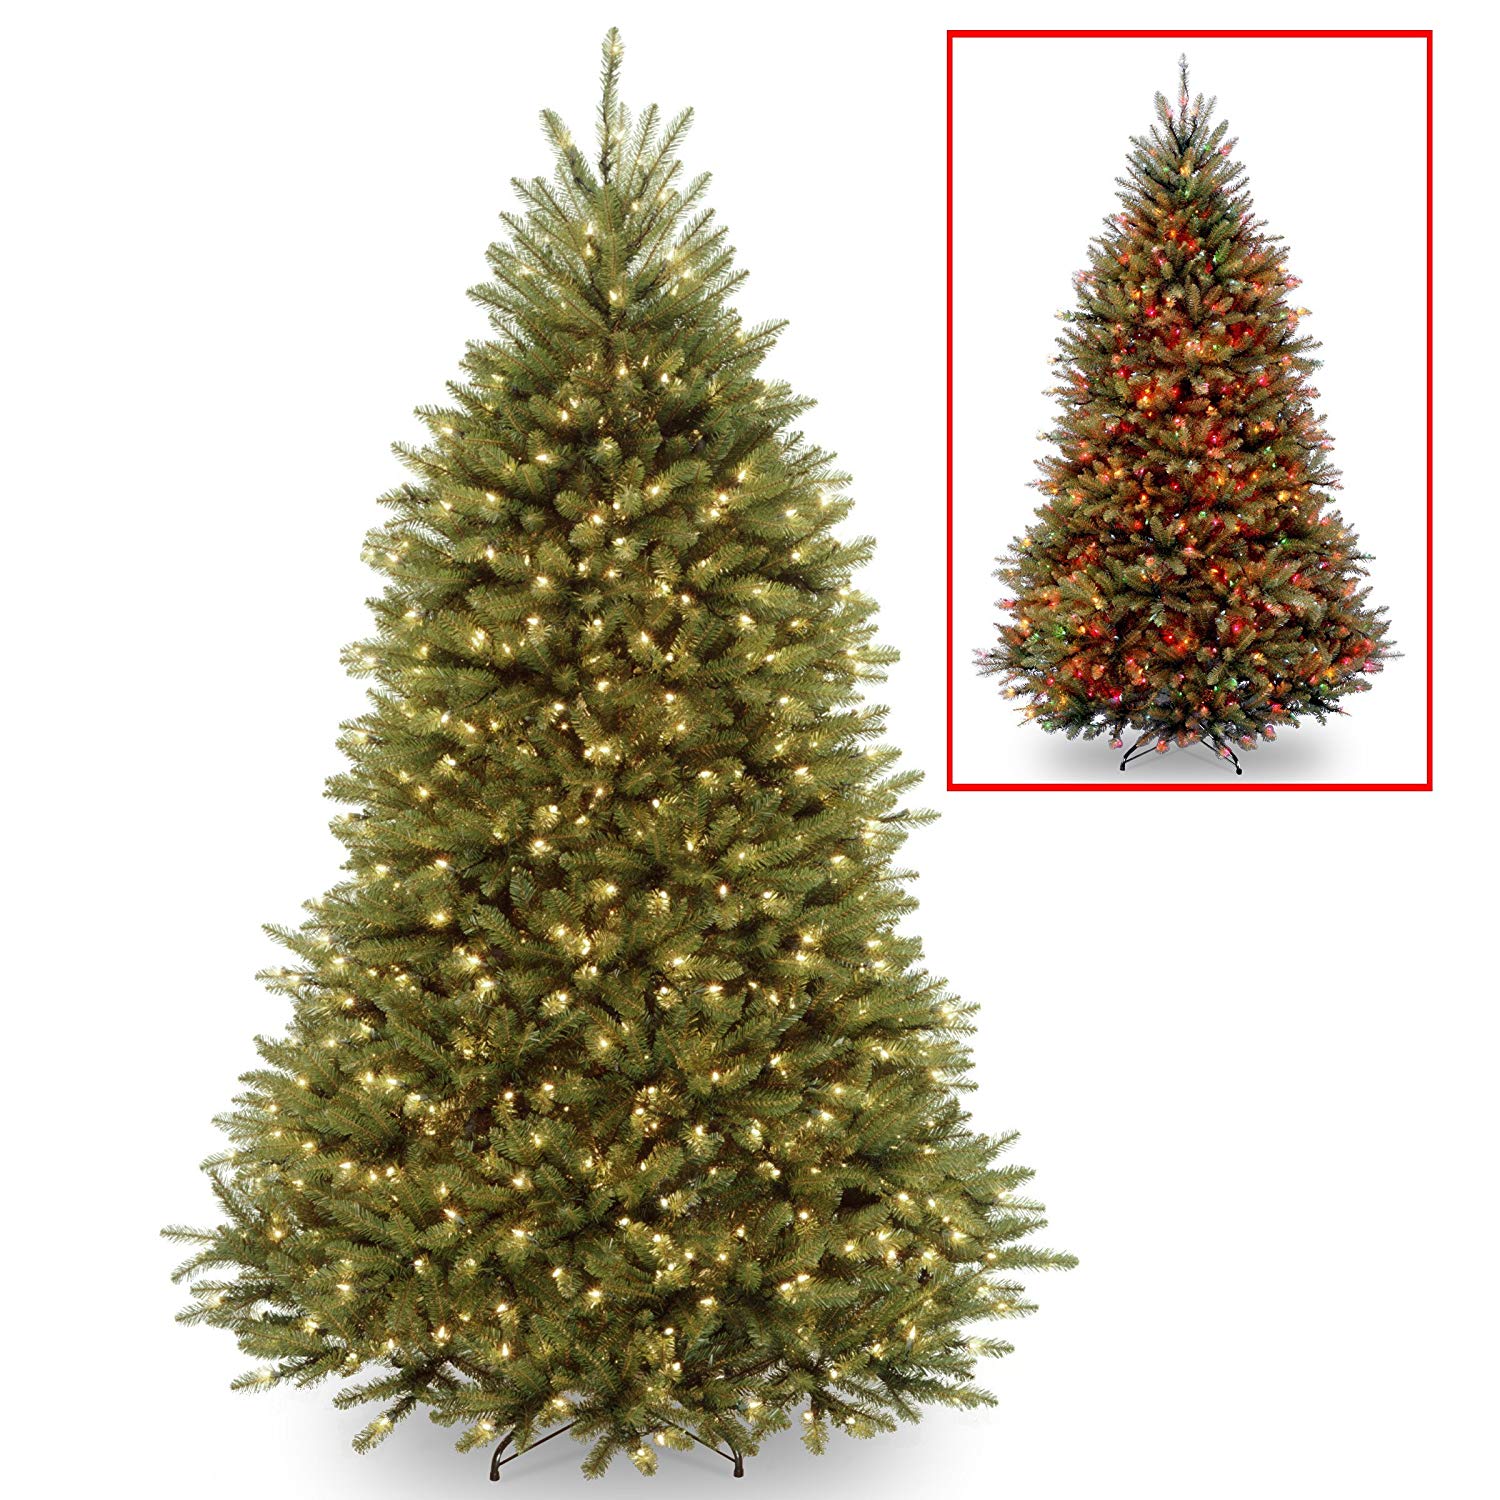 Amazon.com: National Tree 7.5 Foot Dunhill Fir Tree with 700 Dual ...